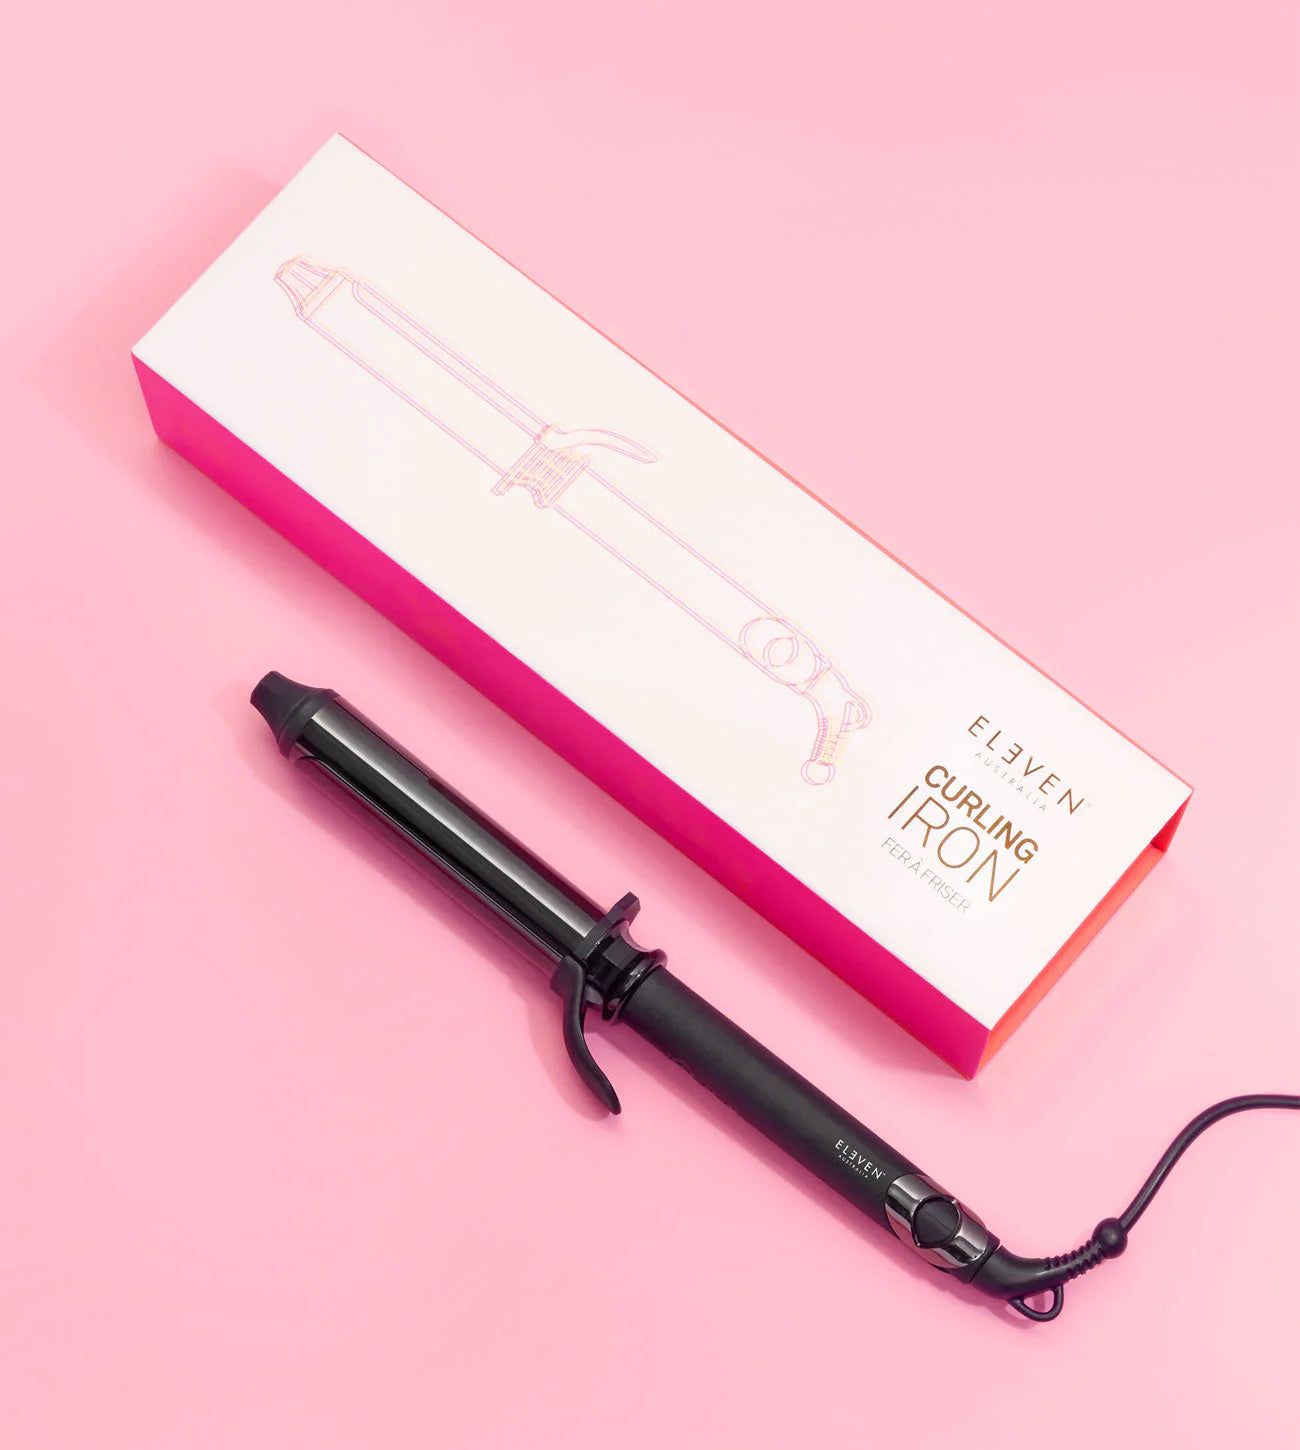 Eleven – Curling Iron